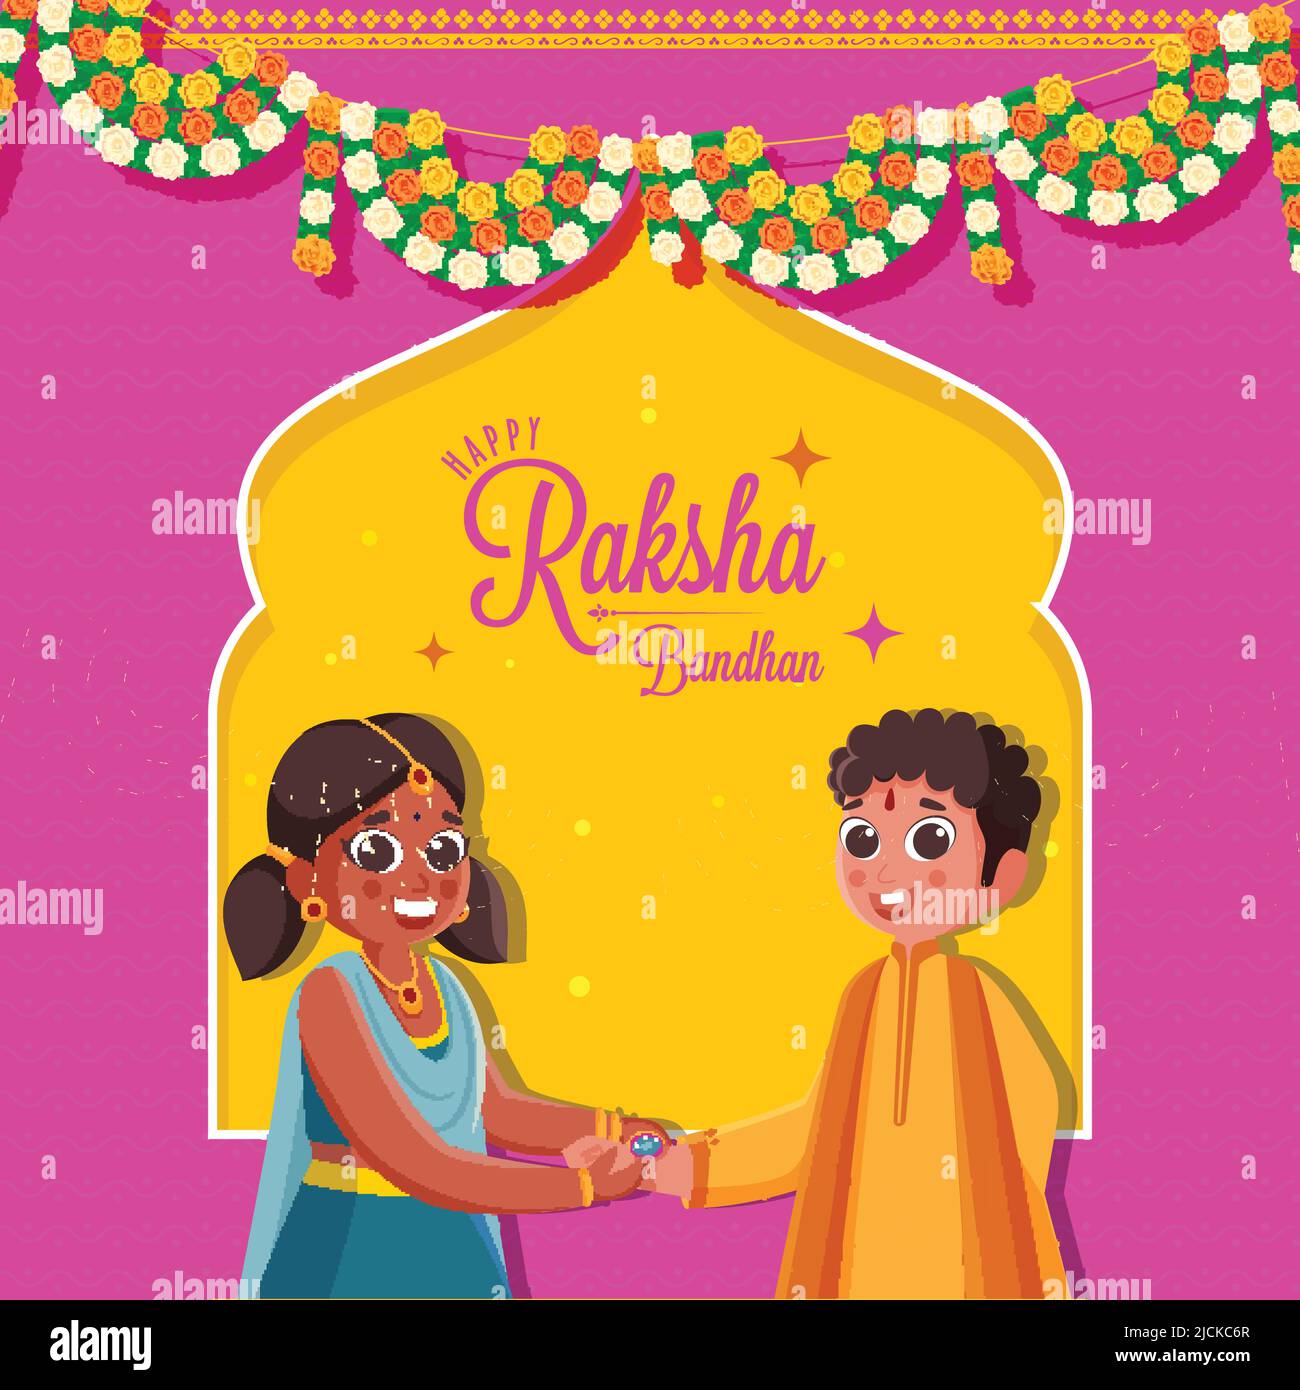 Happy Raksha Bandhan Celebration Concept With Sister Tying Rakhi  (Wristband) To Her Brother On Yellow And Pink Background Stock Vector Image  & Art - Alamy